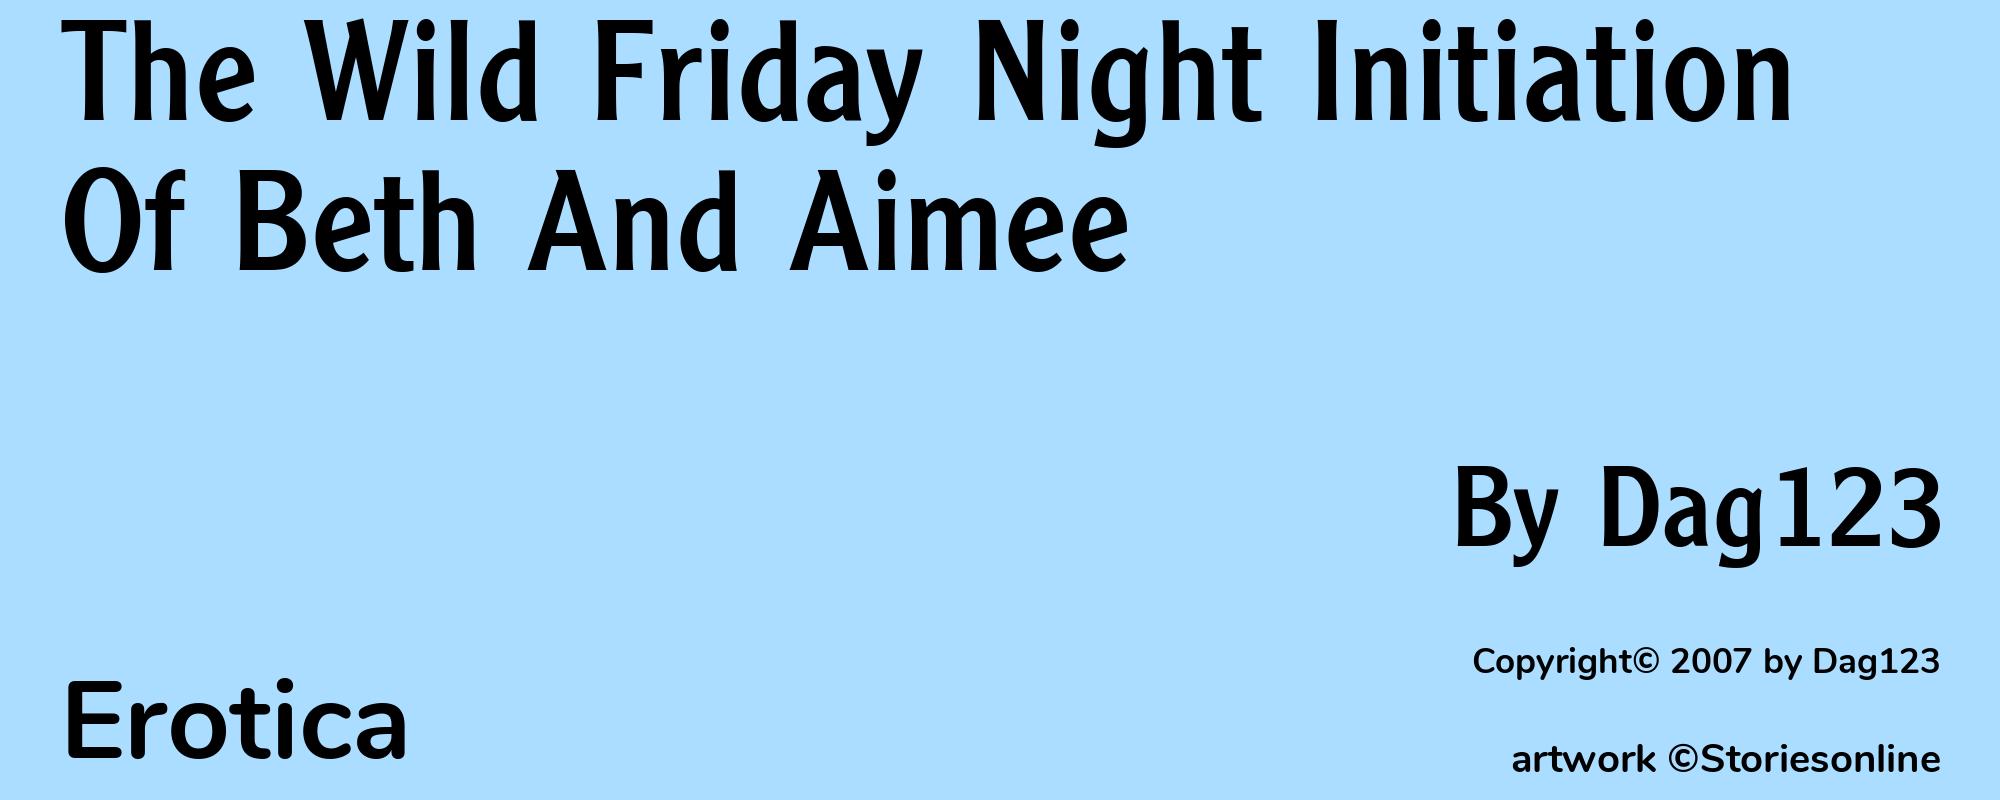 The Wild Friday Night Initiation Of Beth And Aimee - Cover